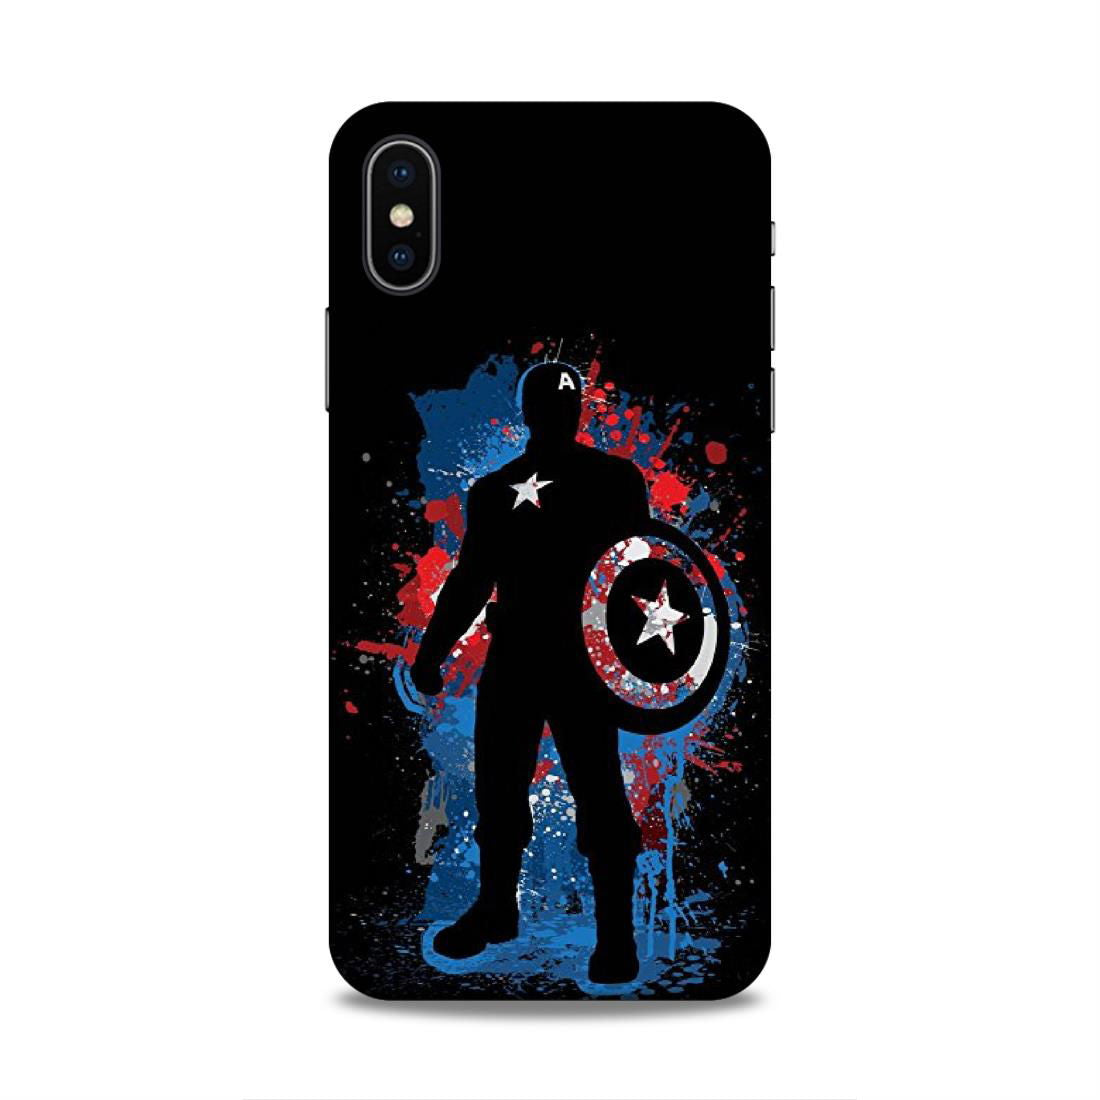 Black Captain America Hard Back Case For Apple iPhone X/XS - Right Marc